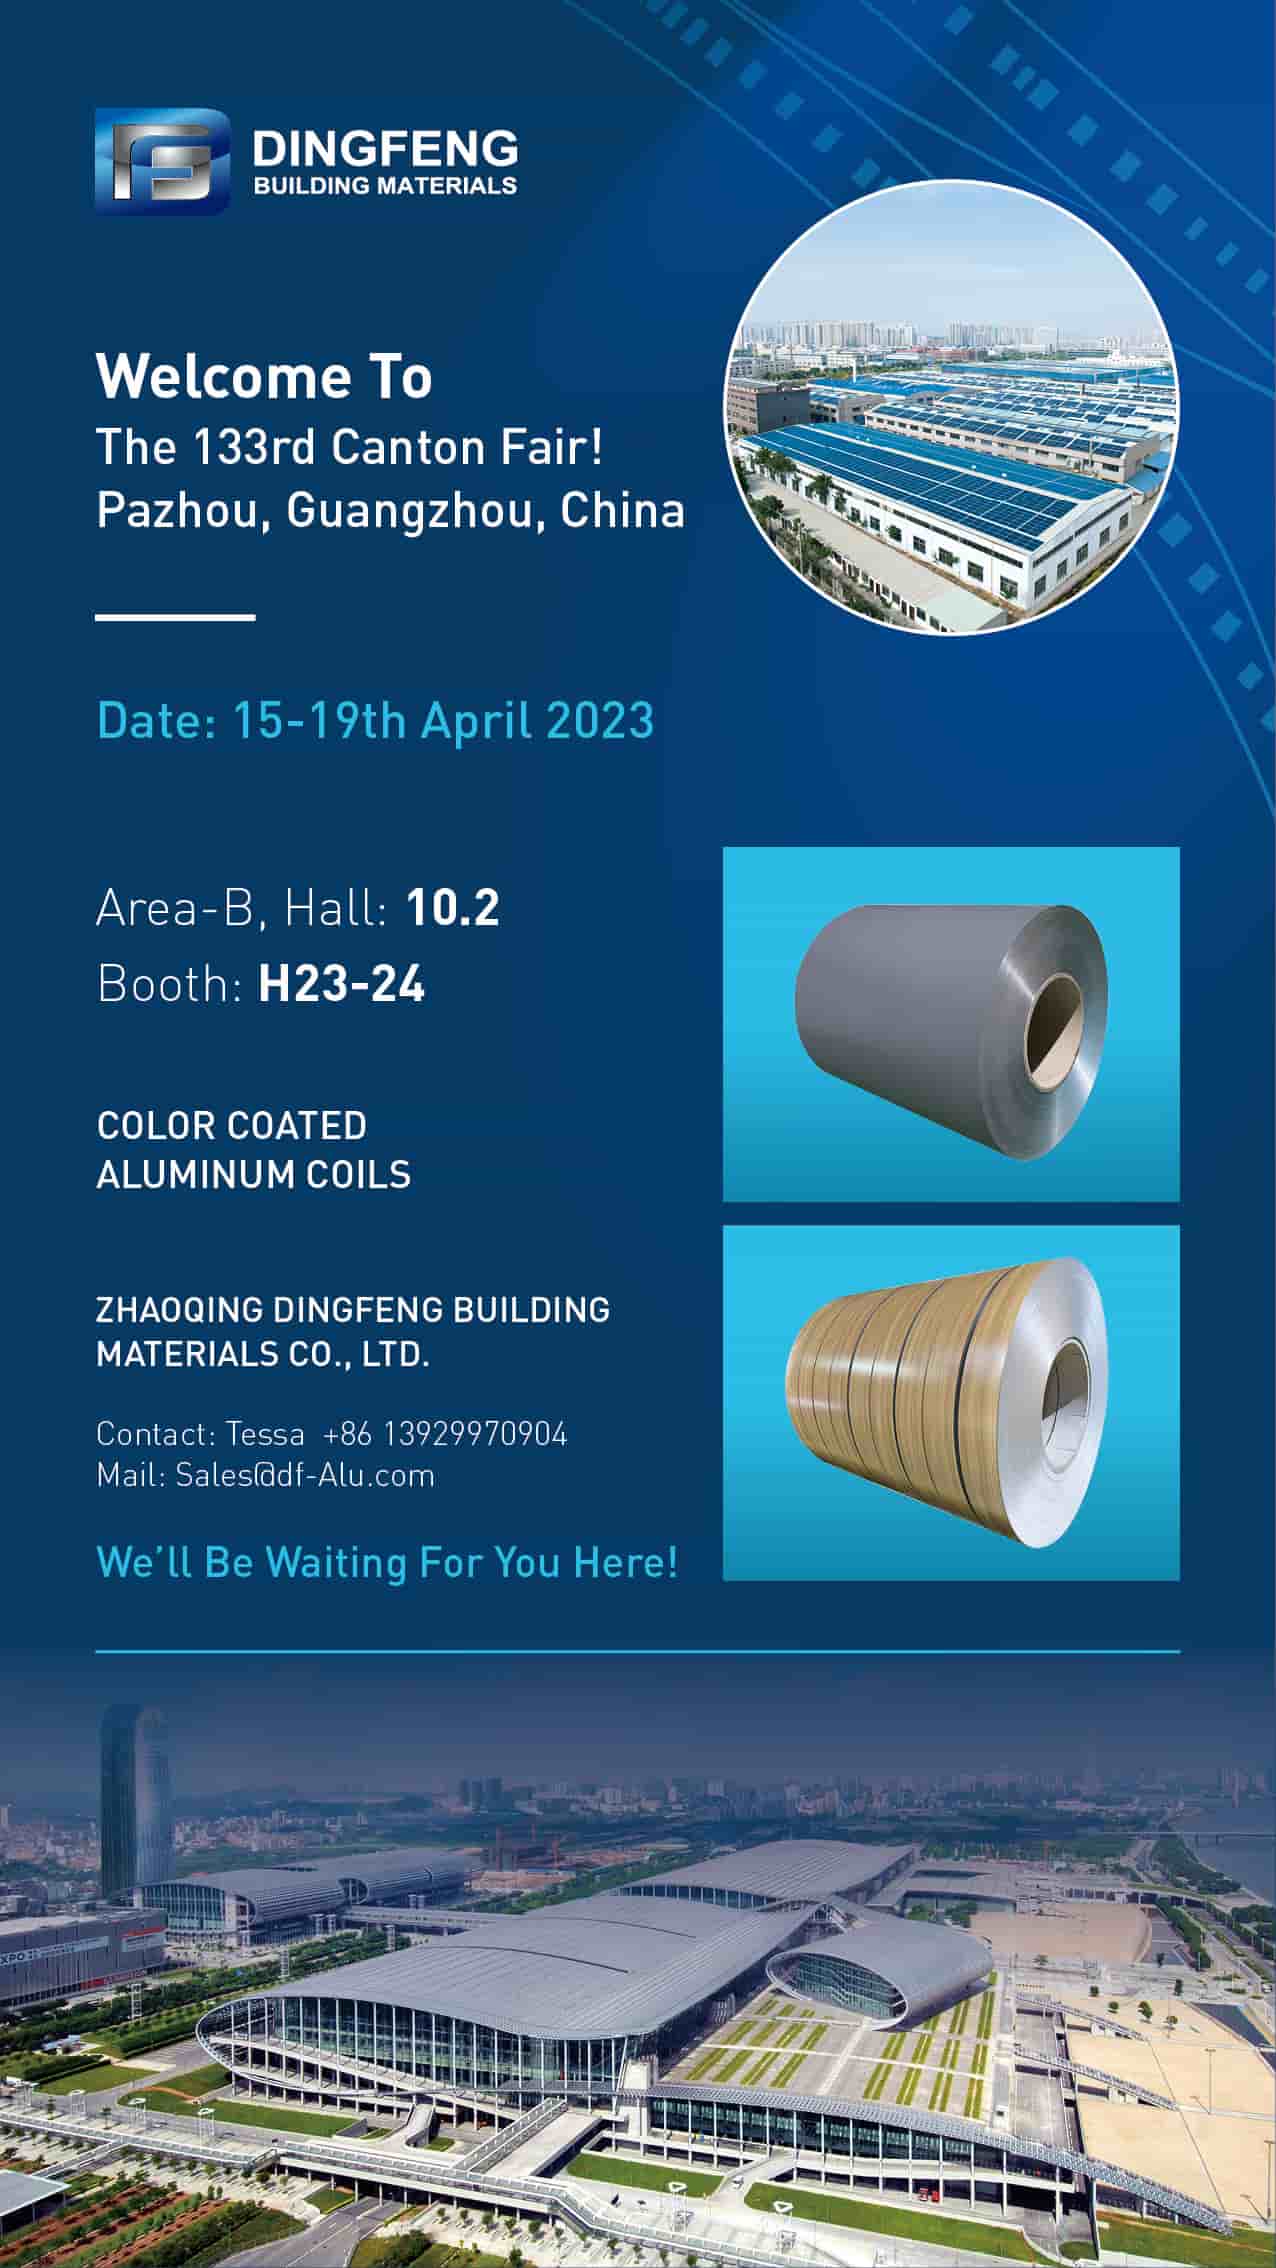 Welcome To 133rd Canton Fair On 15-19th, April 2023 In Guangzhou